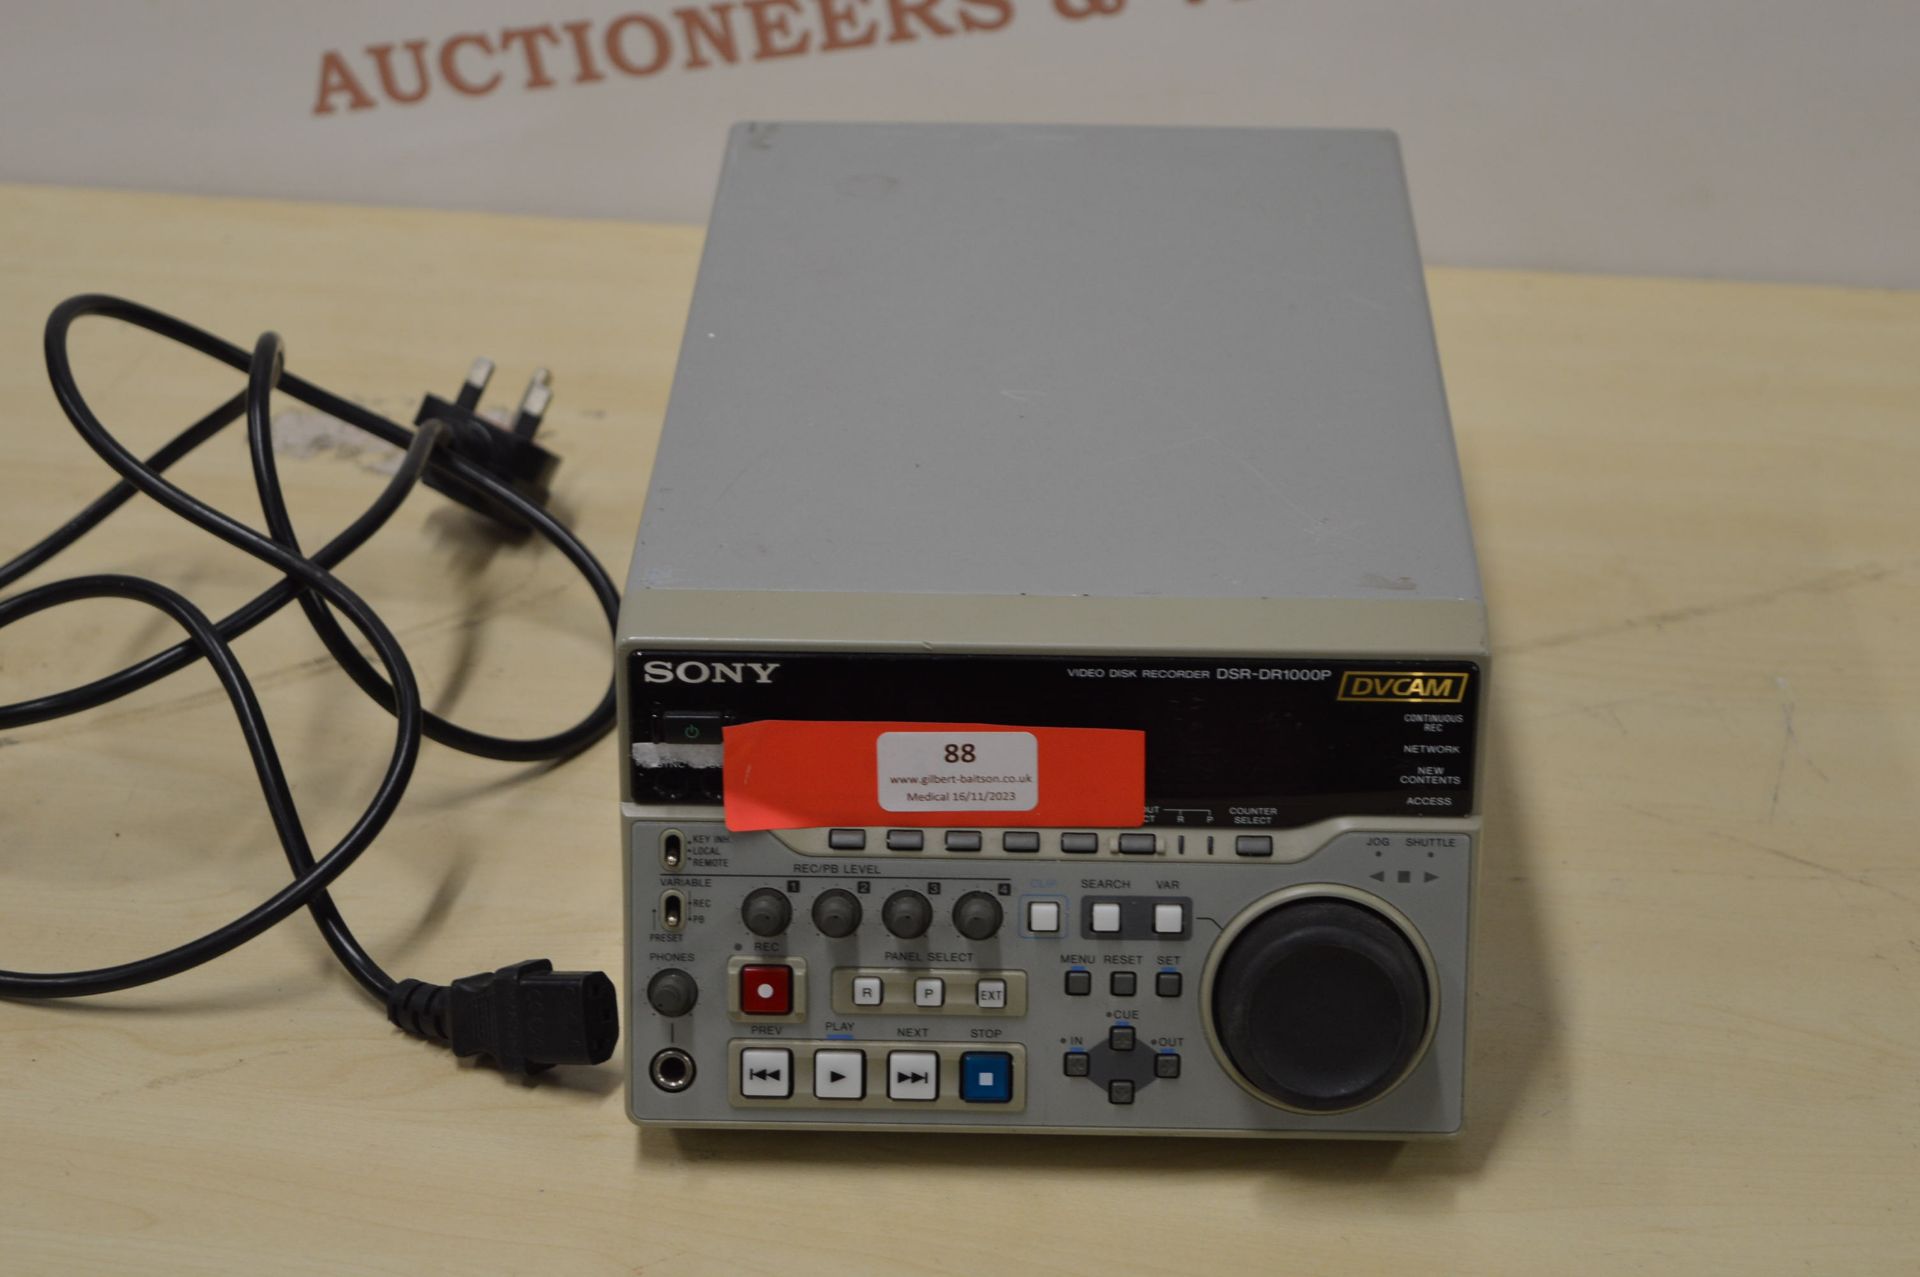 * Sony DSR-DR1000P video disc recorder